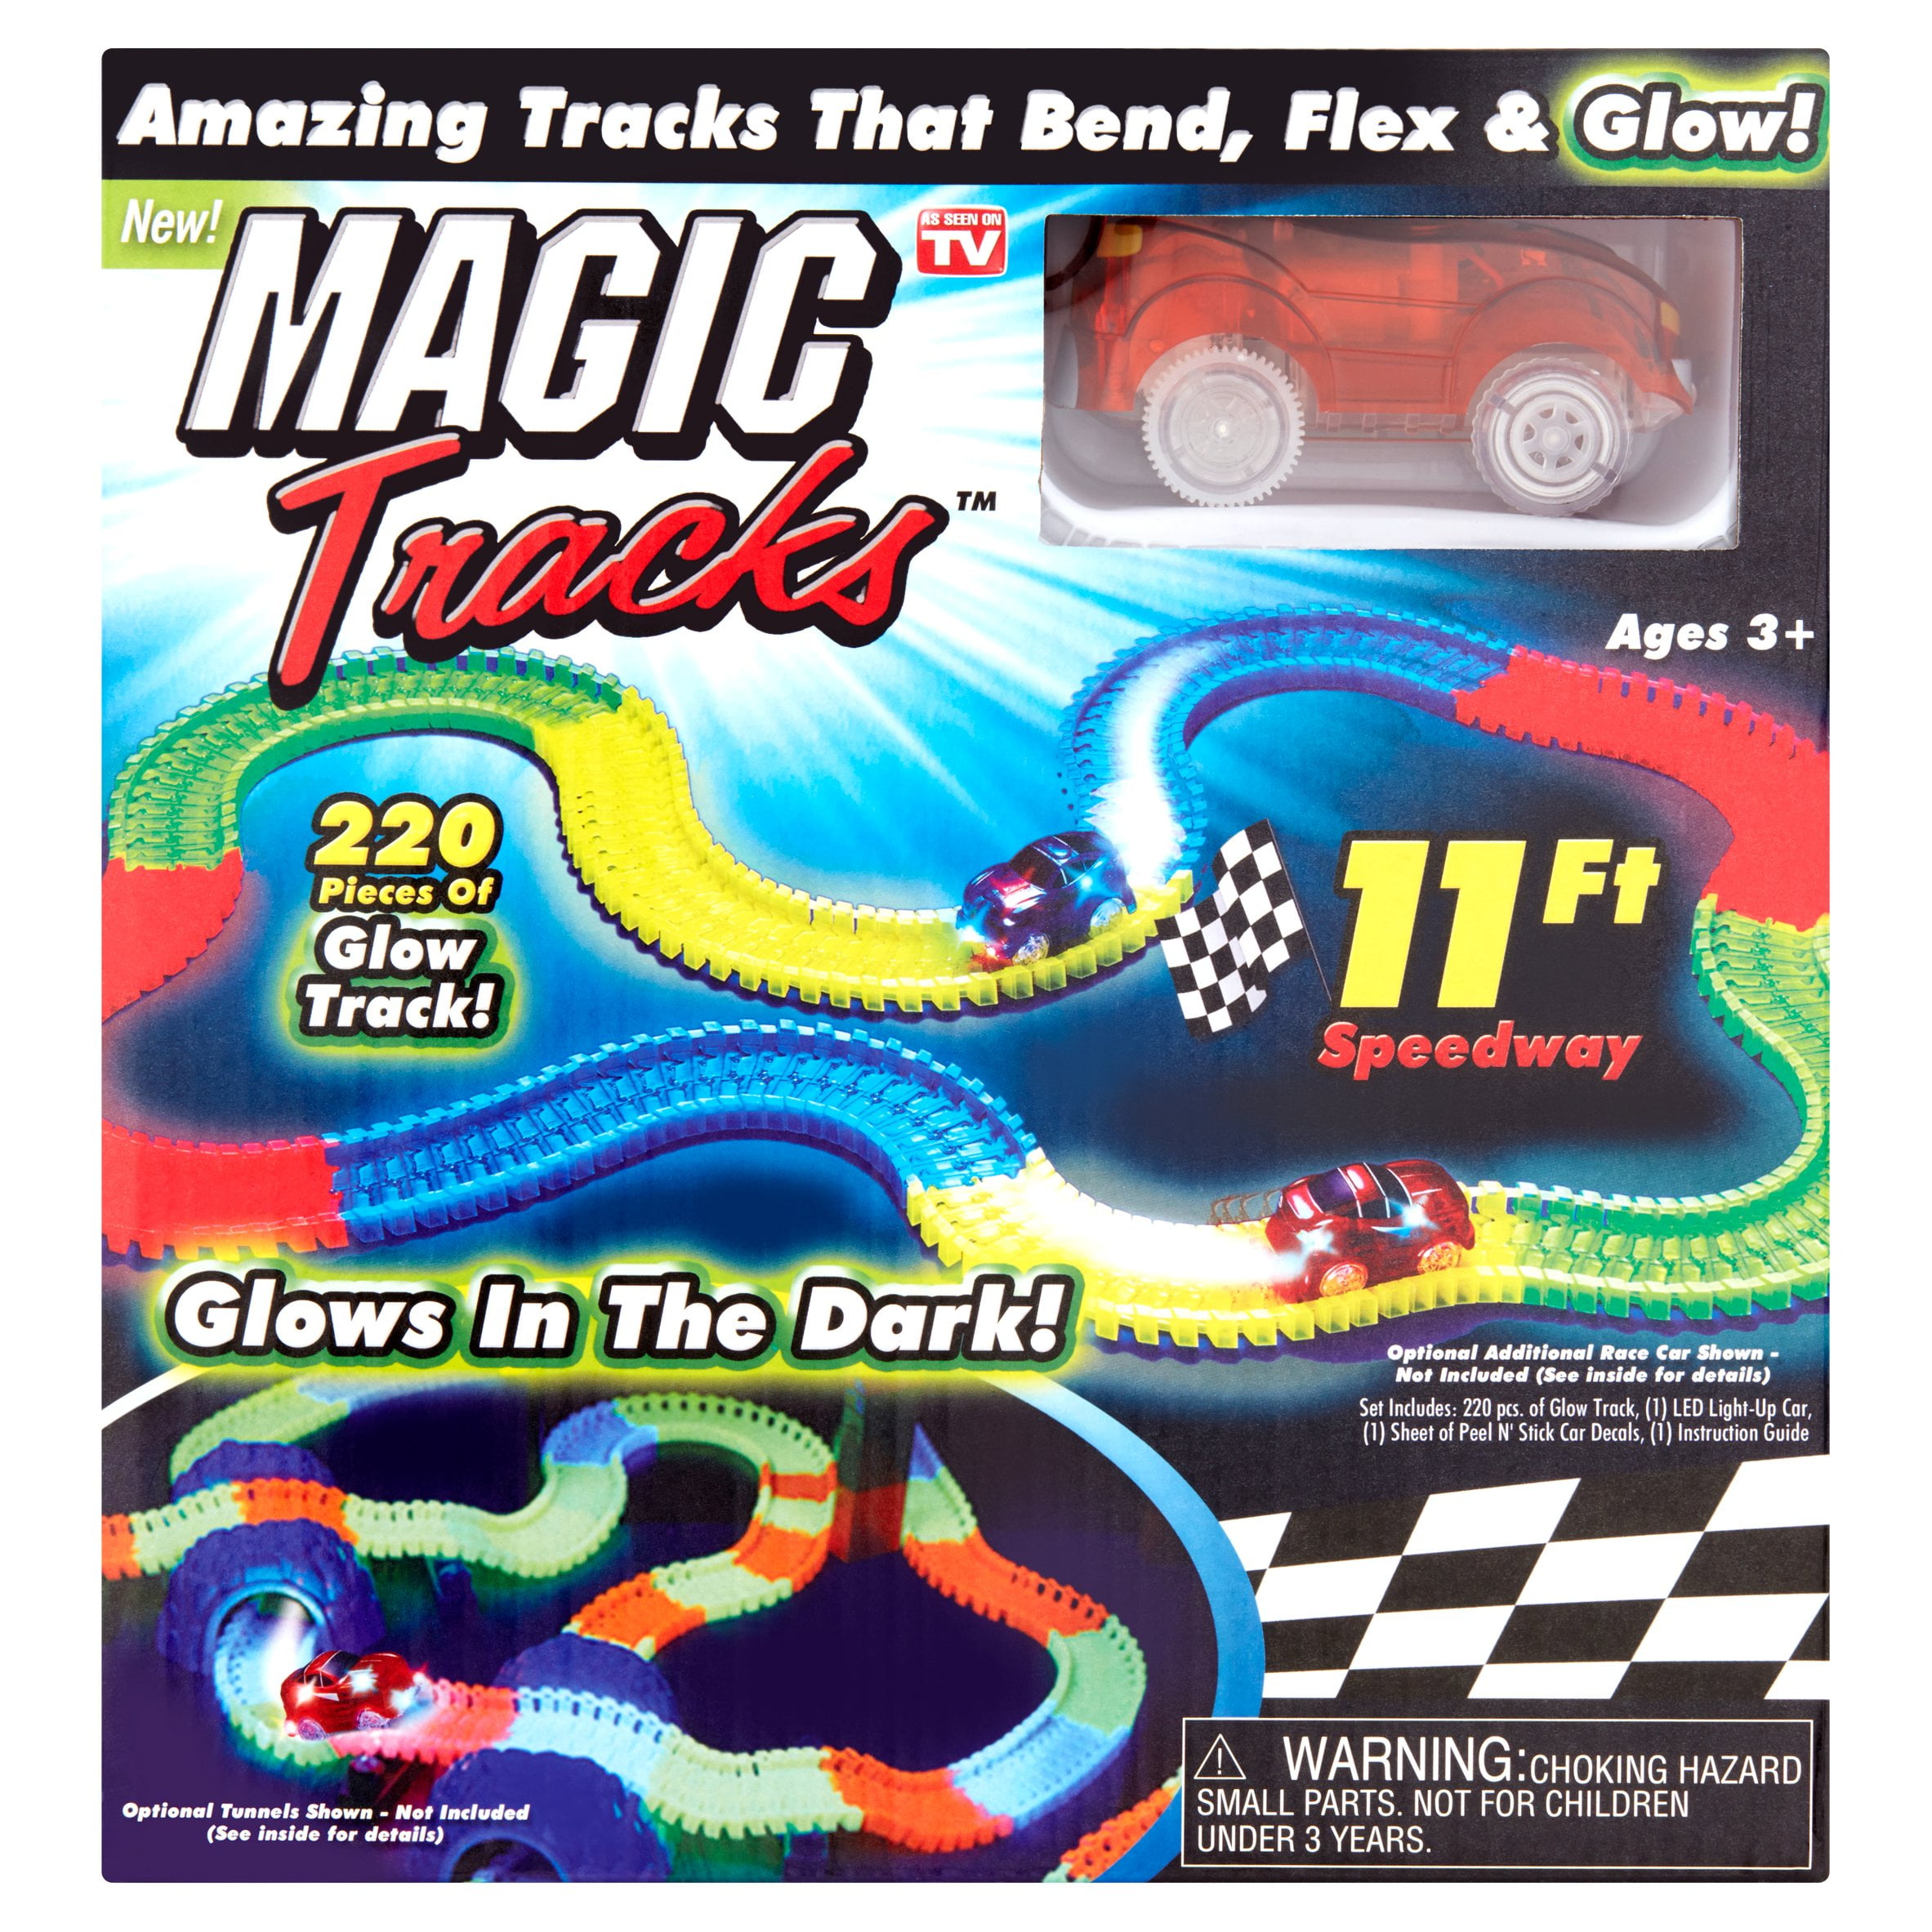 Amazing Cars for Magi c Track s Glow in the Dark Racetrack Light Up Race Cars · 